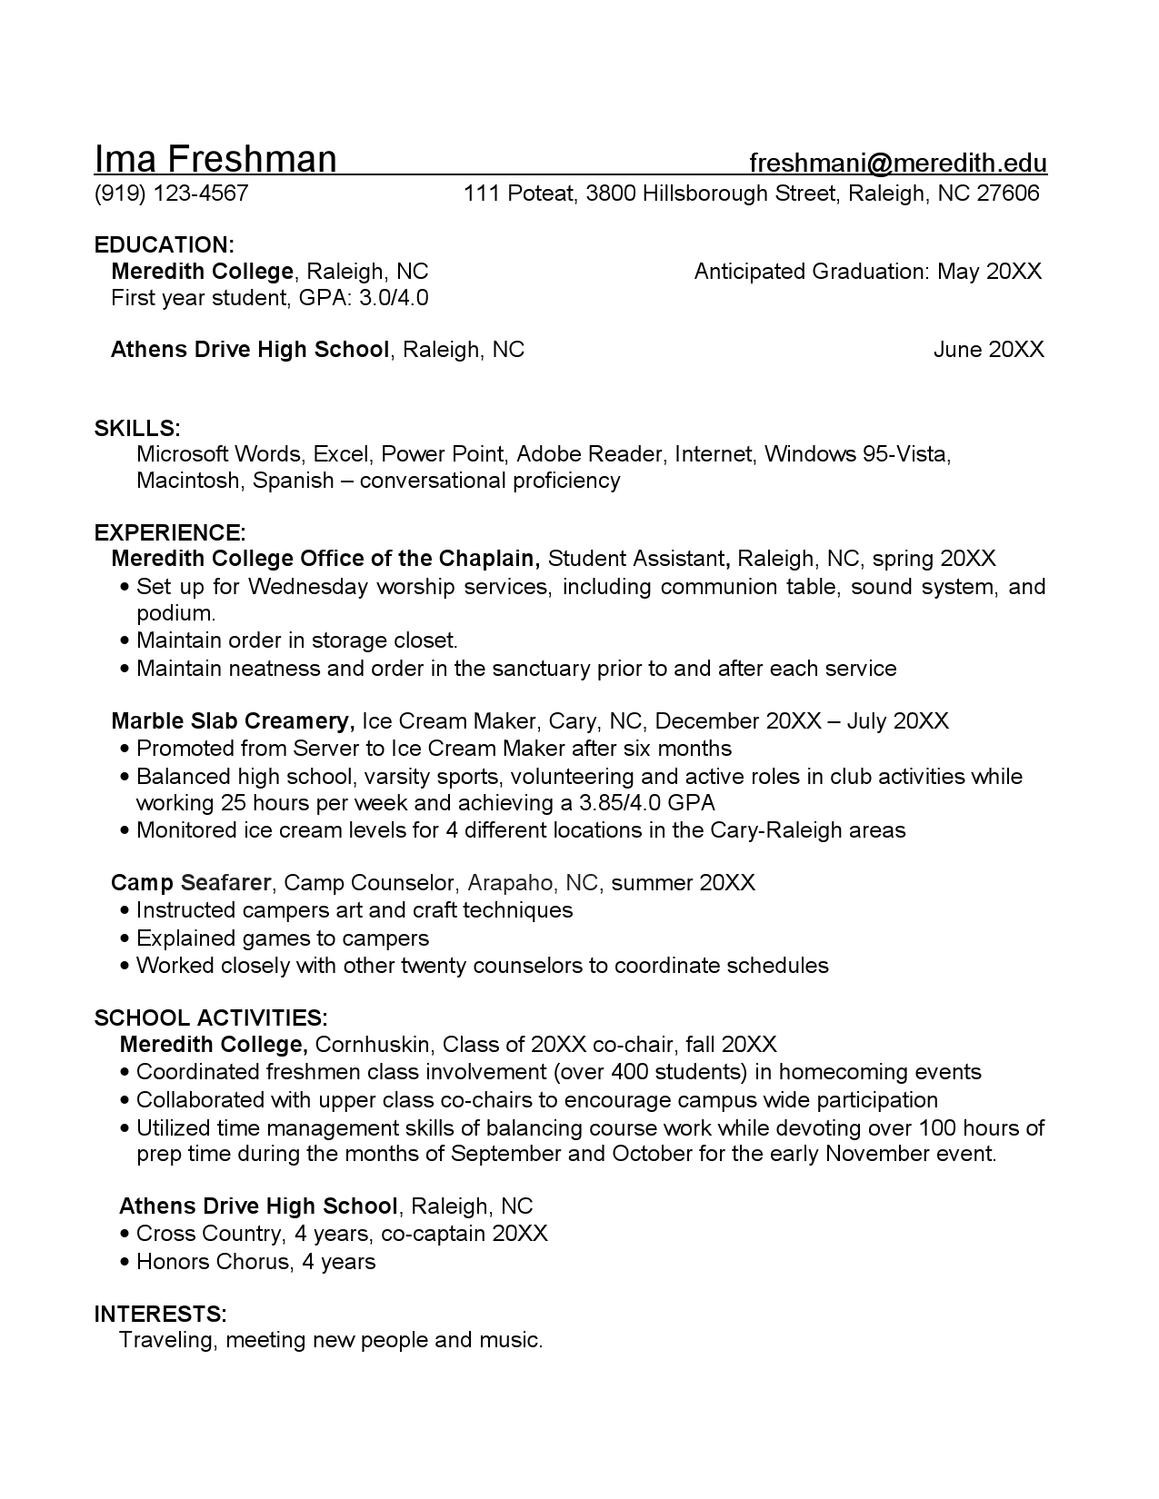 Sample Resume for First Year College Student Freshman Resume Sample by Meredith College Academic & Career …